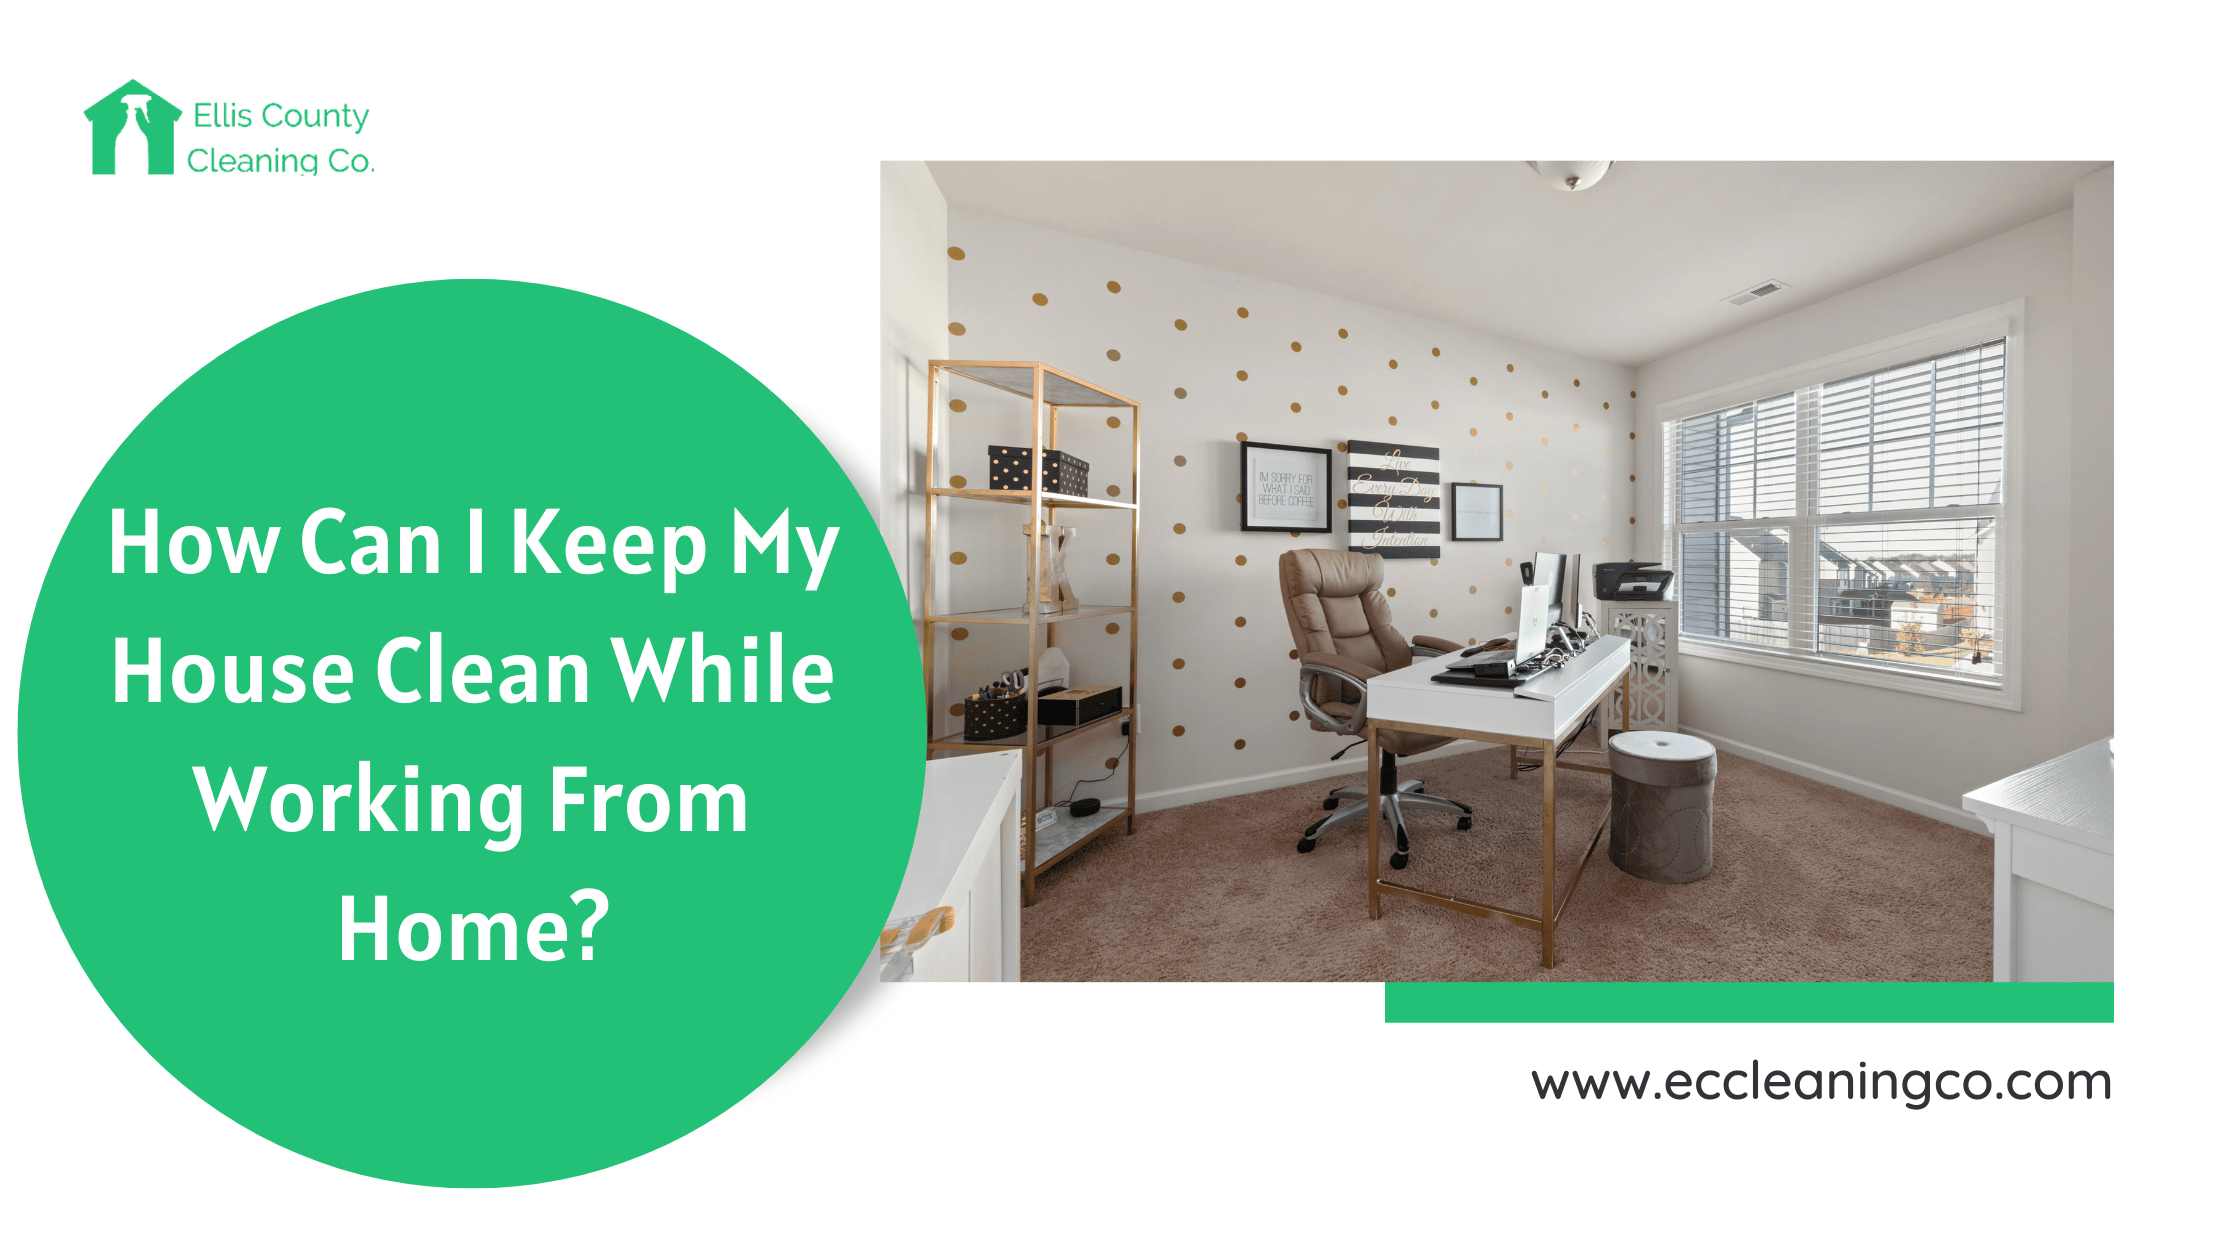 How Can I Keep My House Clean While Working From Home